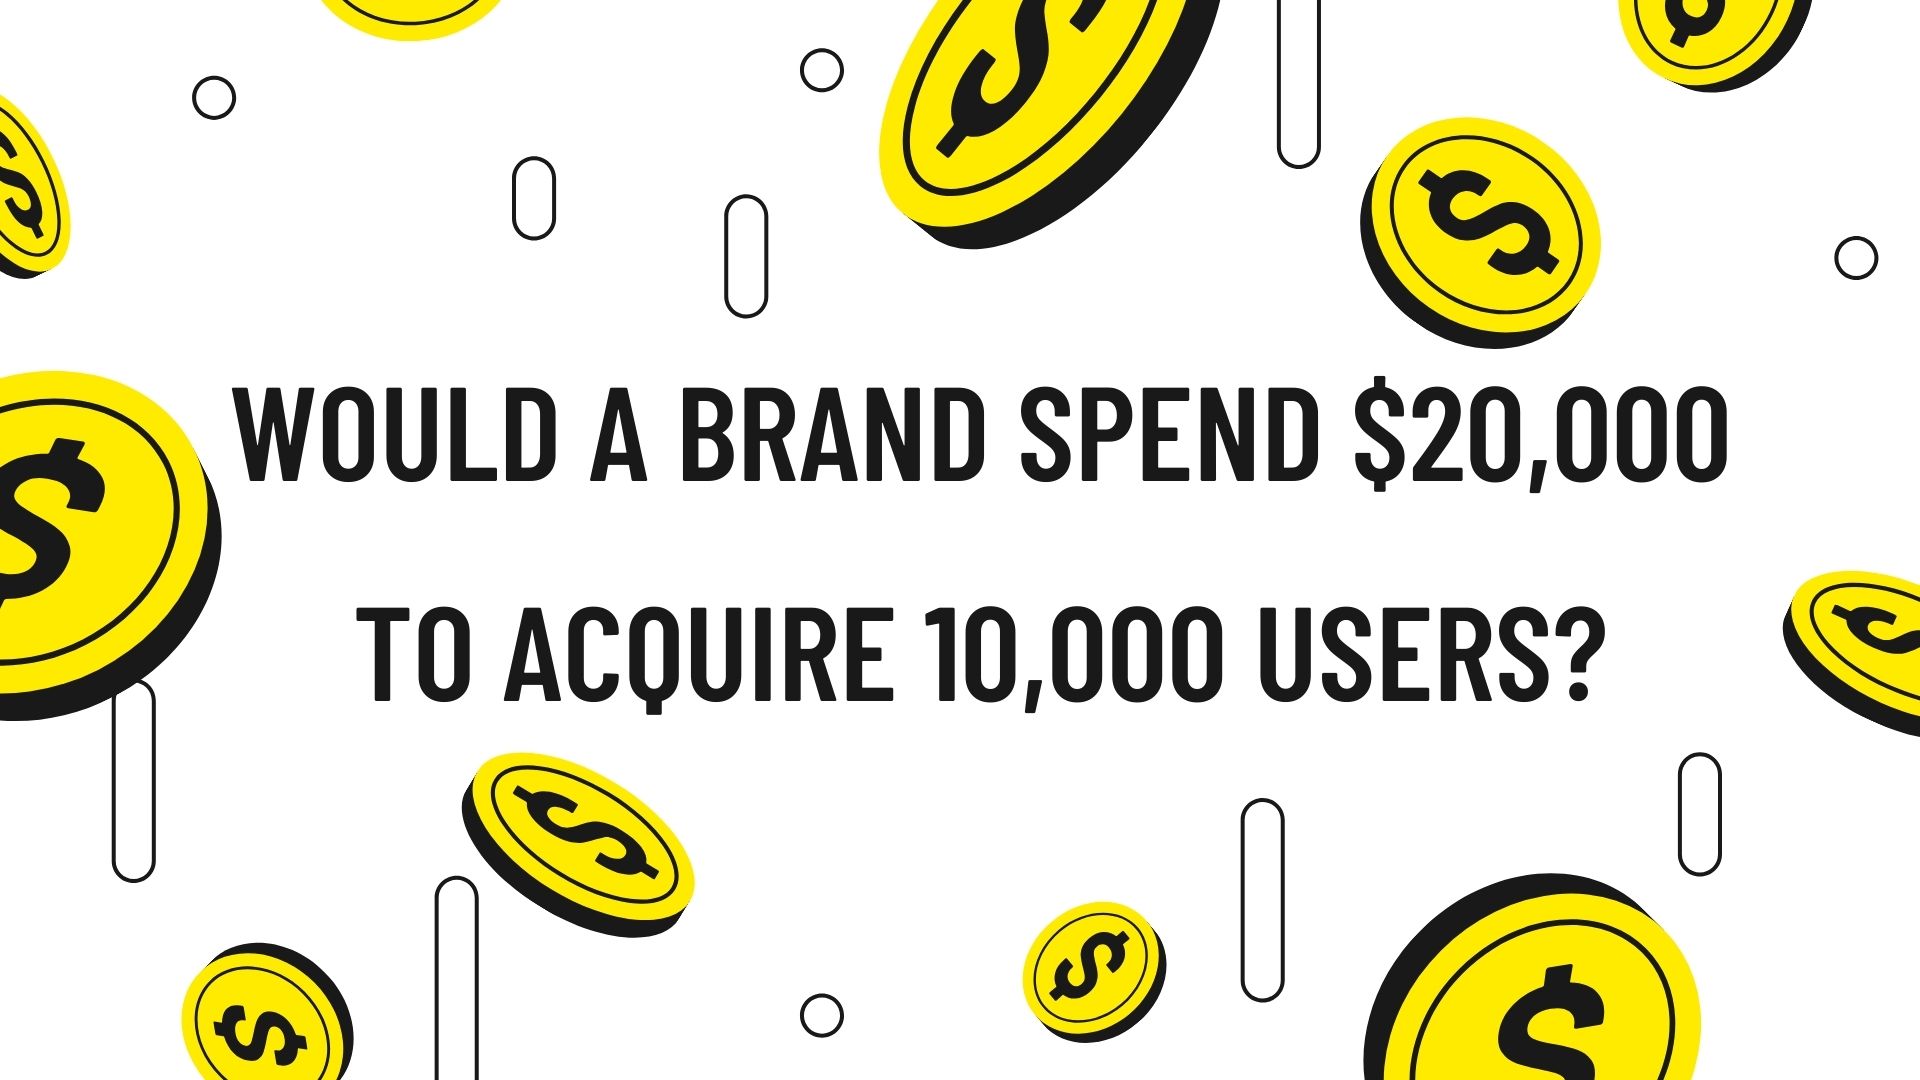 Would a brand spend $20,000 to acquire 10,000 users?